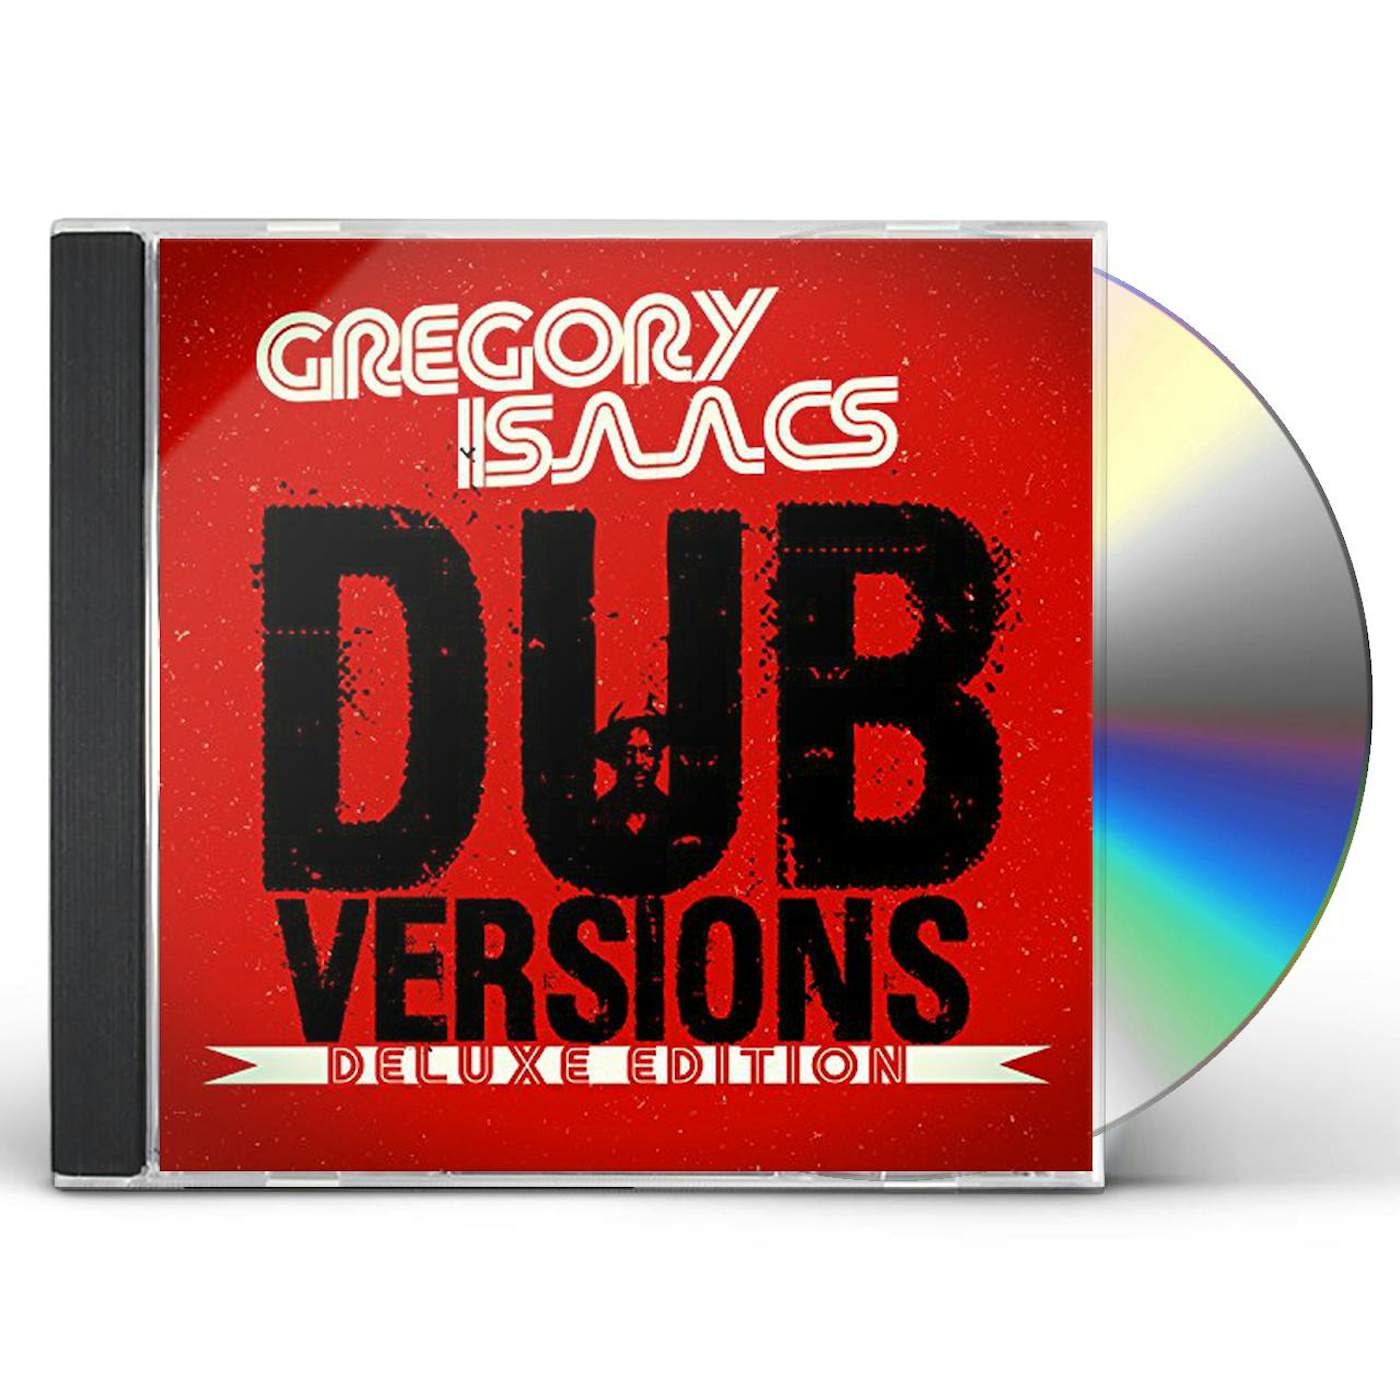 Gregory Isaacs DUB VERSIONS (DELUXE EDITION) CD